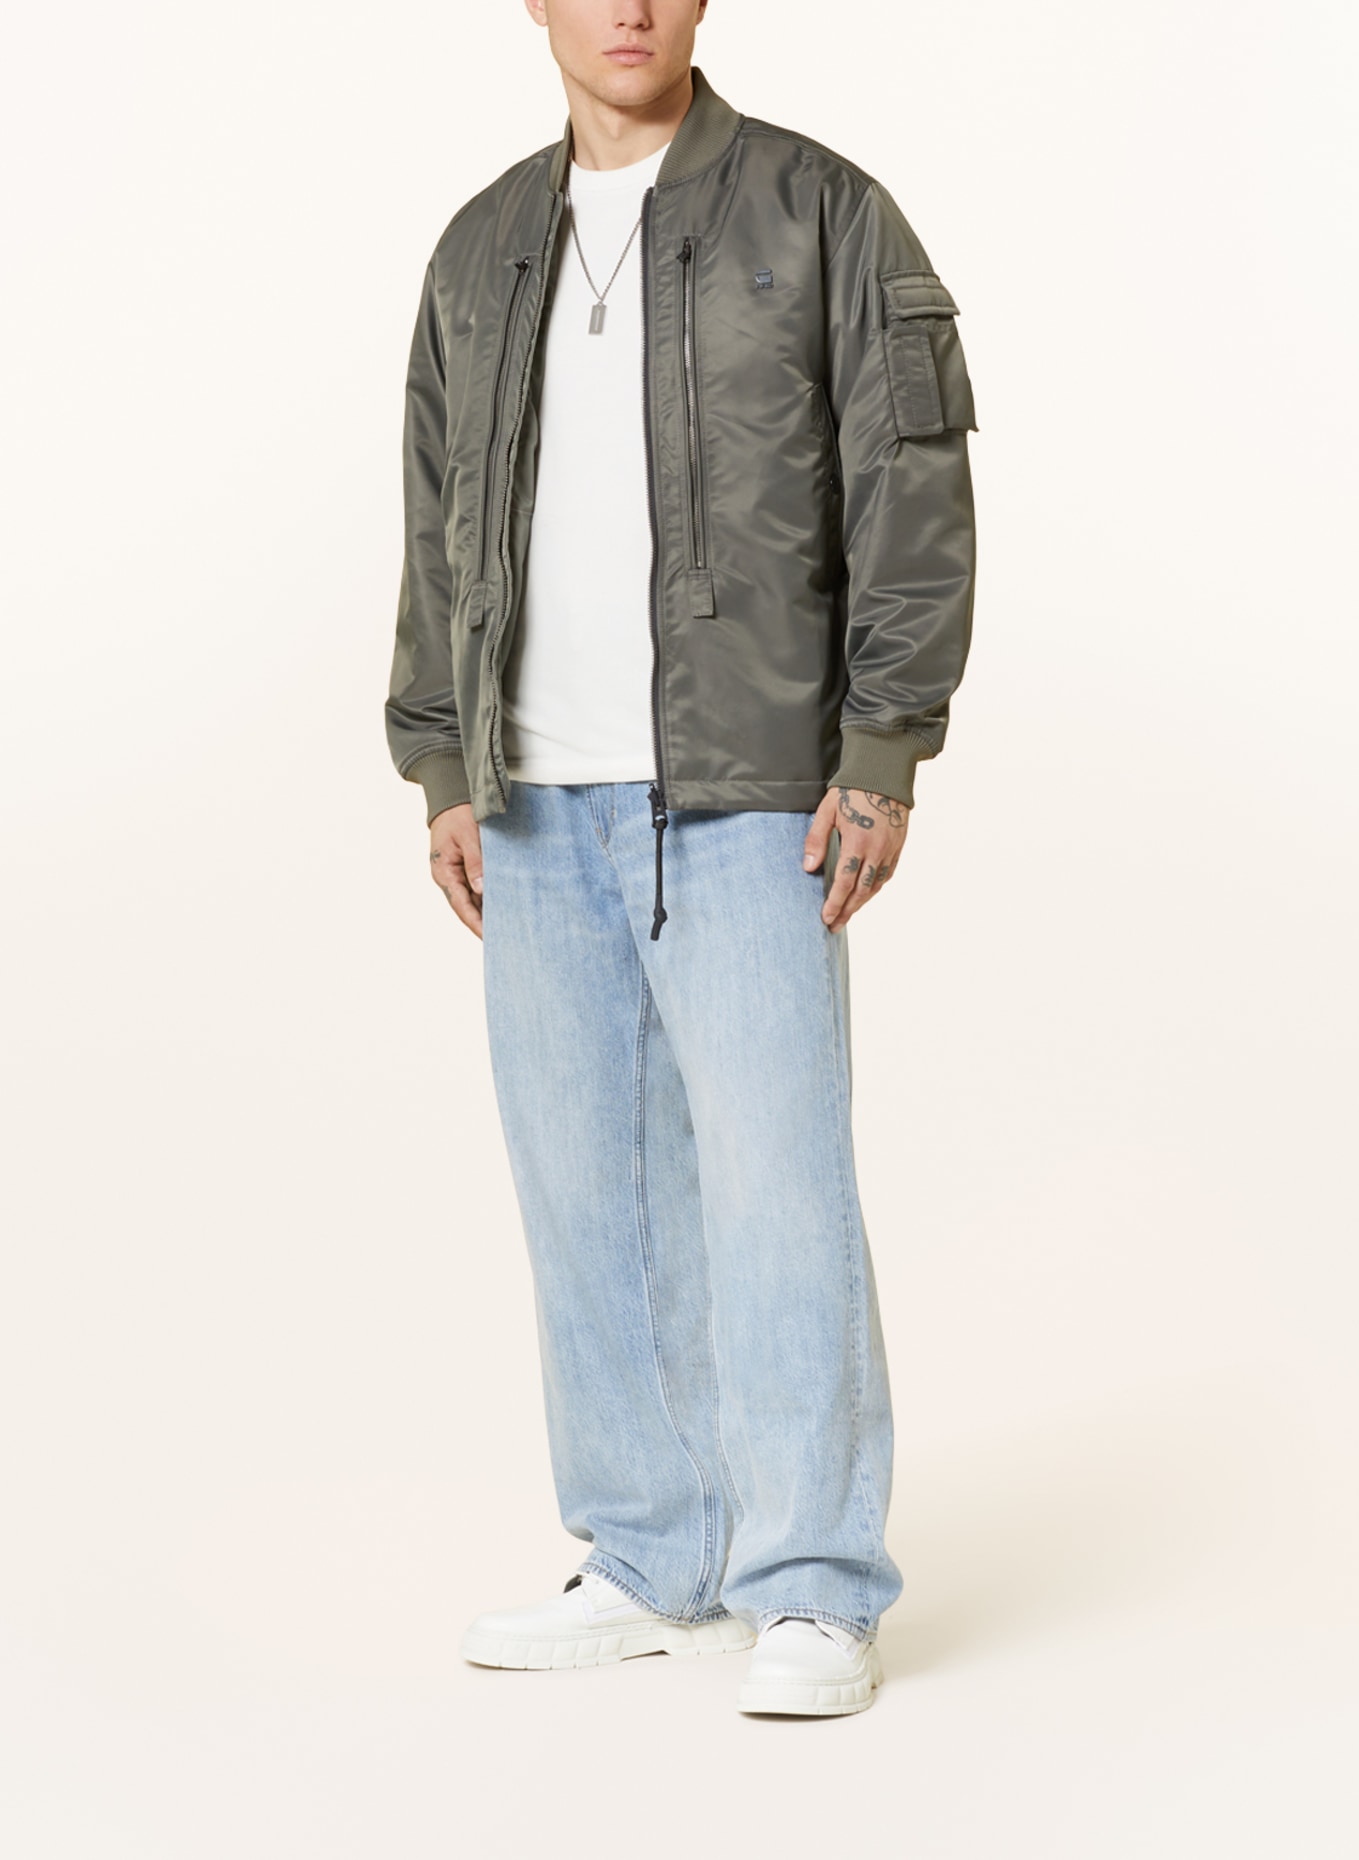 G-Star RAW Reversible bomber jacket DECK, Color: GRAY (Image 4)